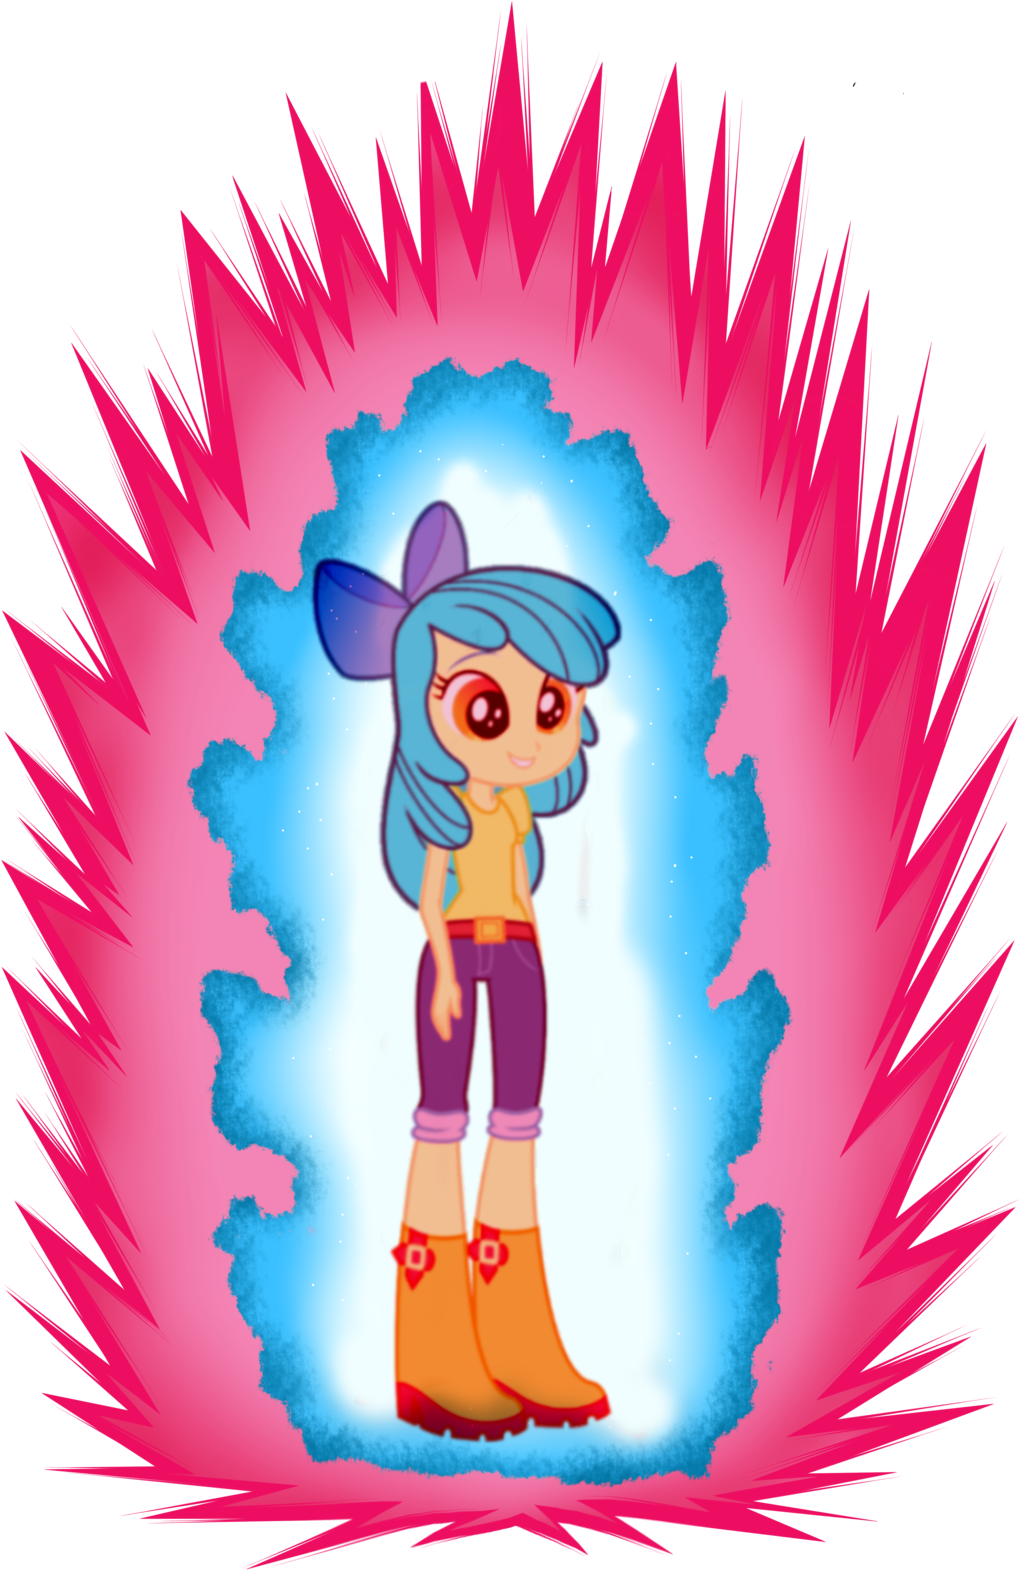 Cartoon Girl With Blue Hair And Pink Hair Standing In Front Of Pink And Blue Flames